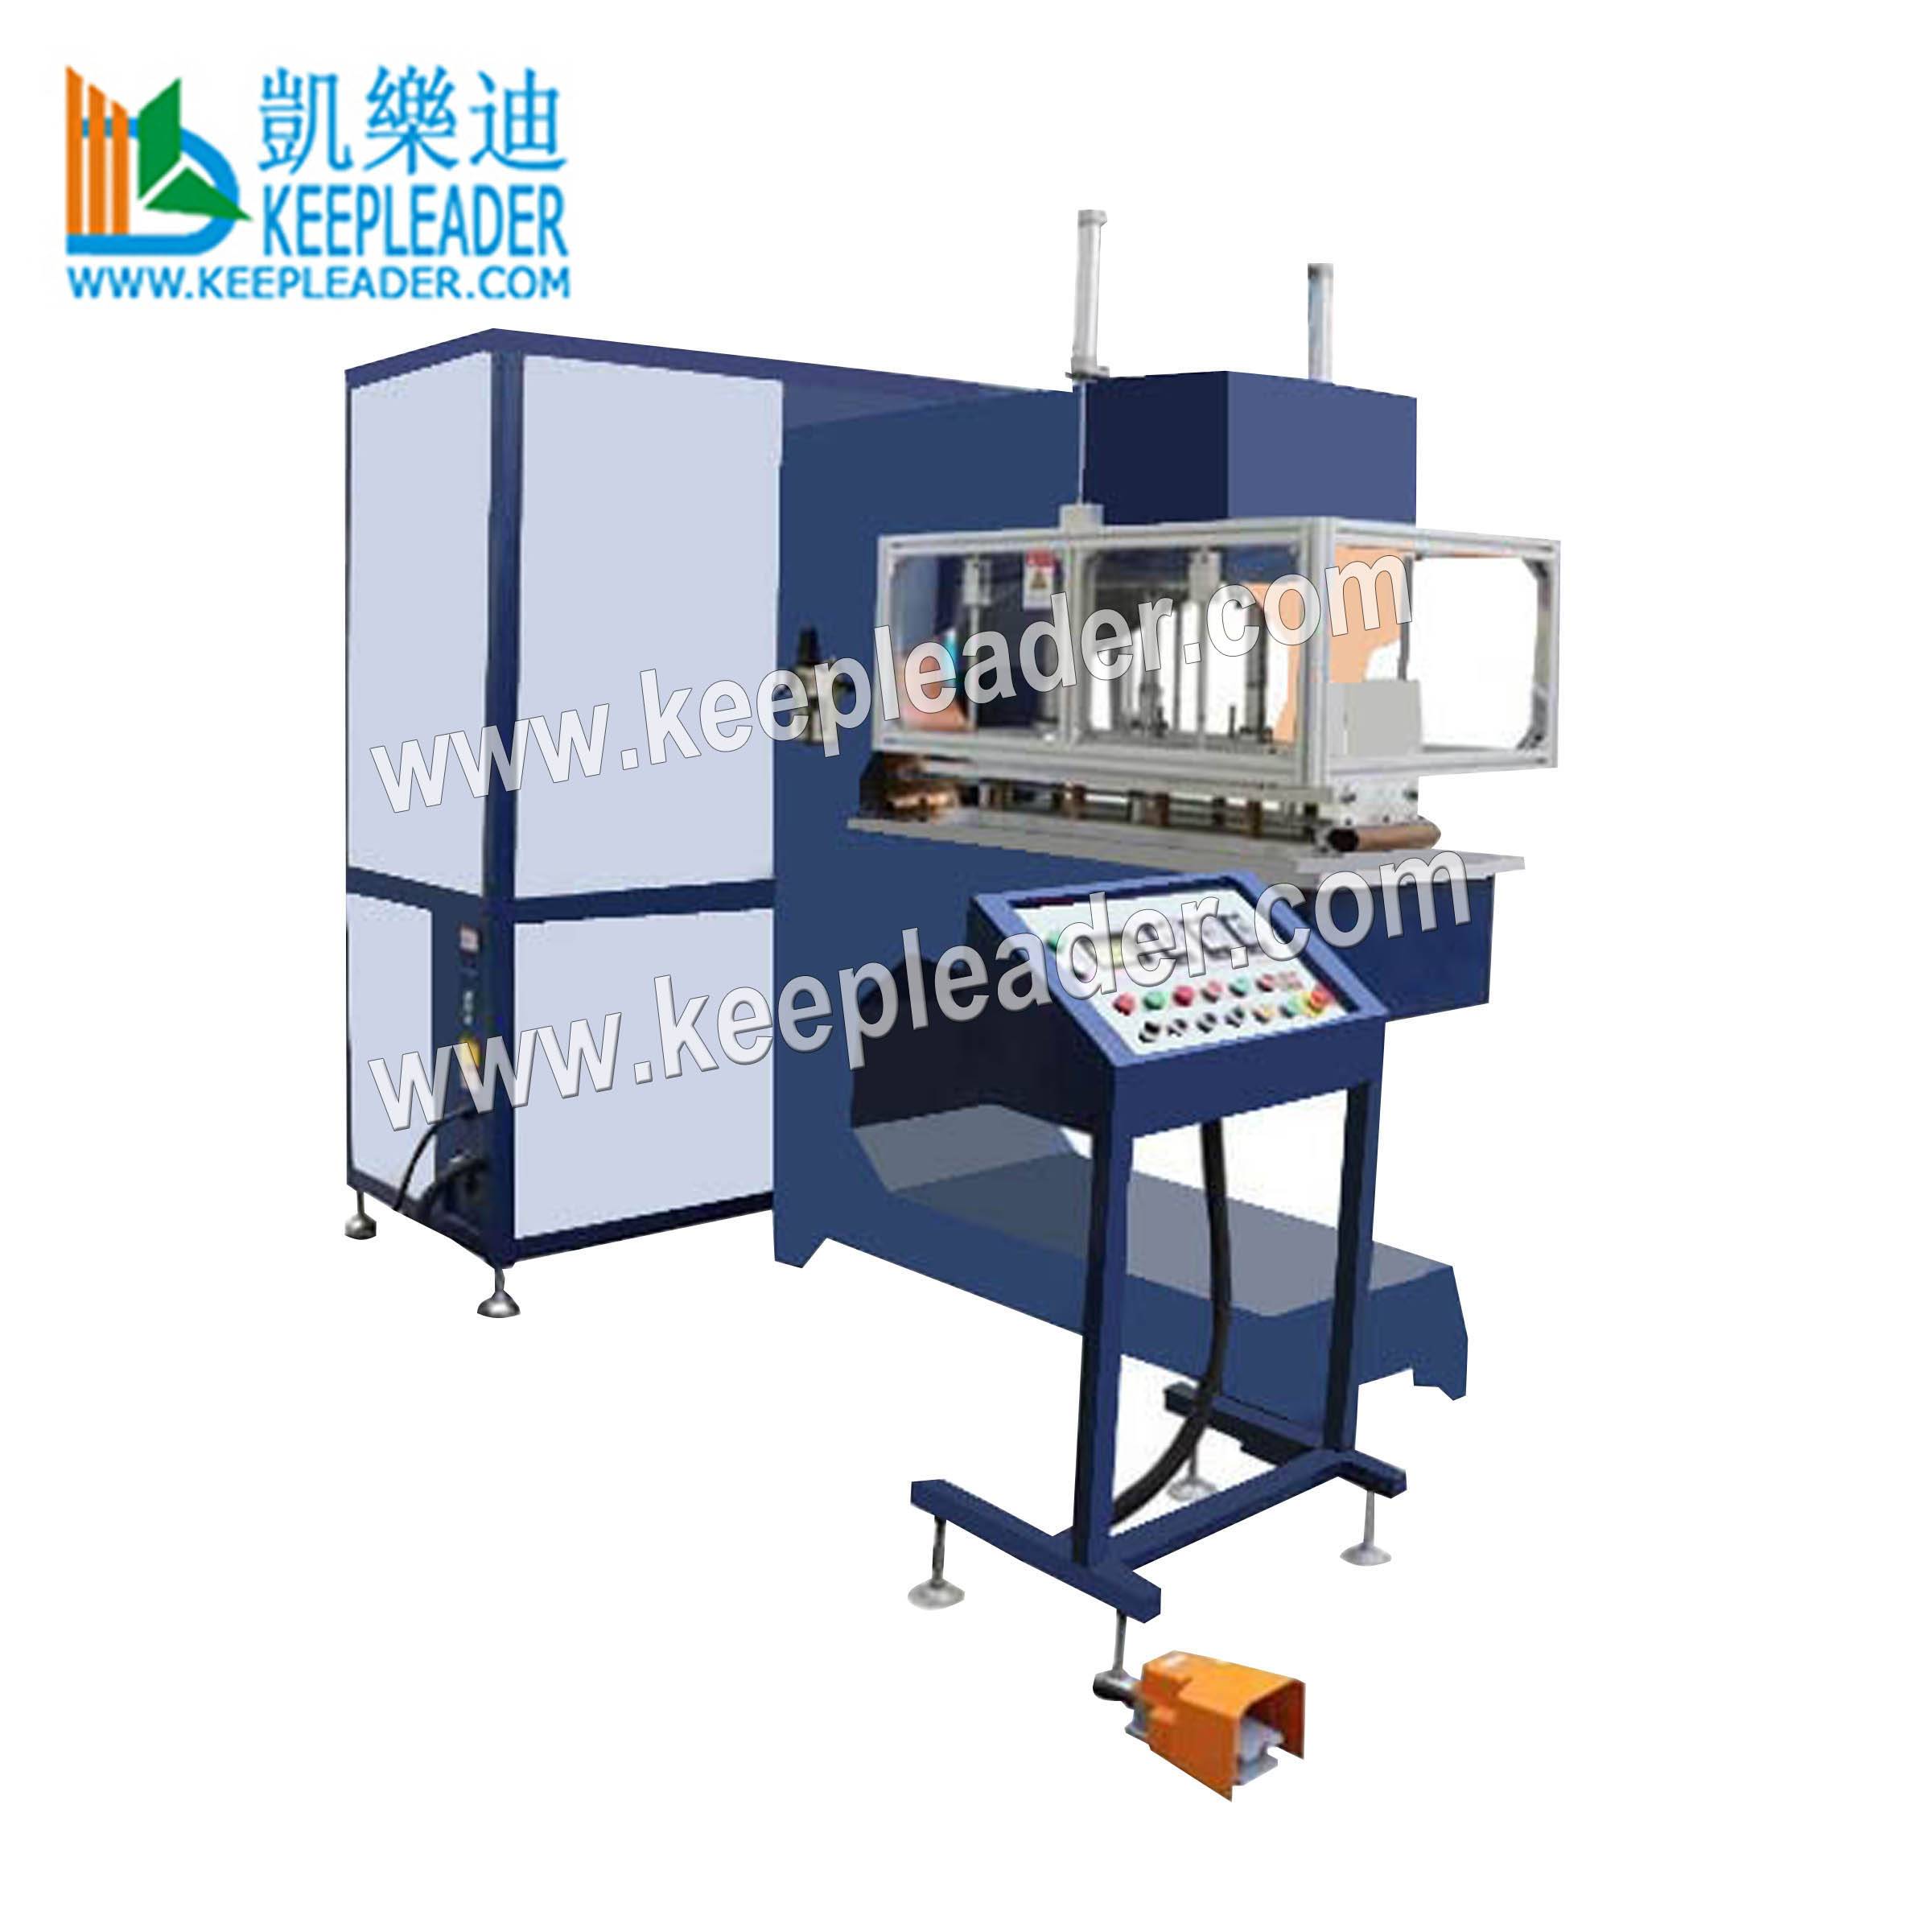 PVC_PU Profile Cleat_Sidewall Welding Machine for Conveyor Belt High Frequency Welding of Conveyor Belt High Frequency Welding Featured Image